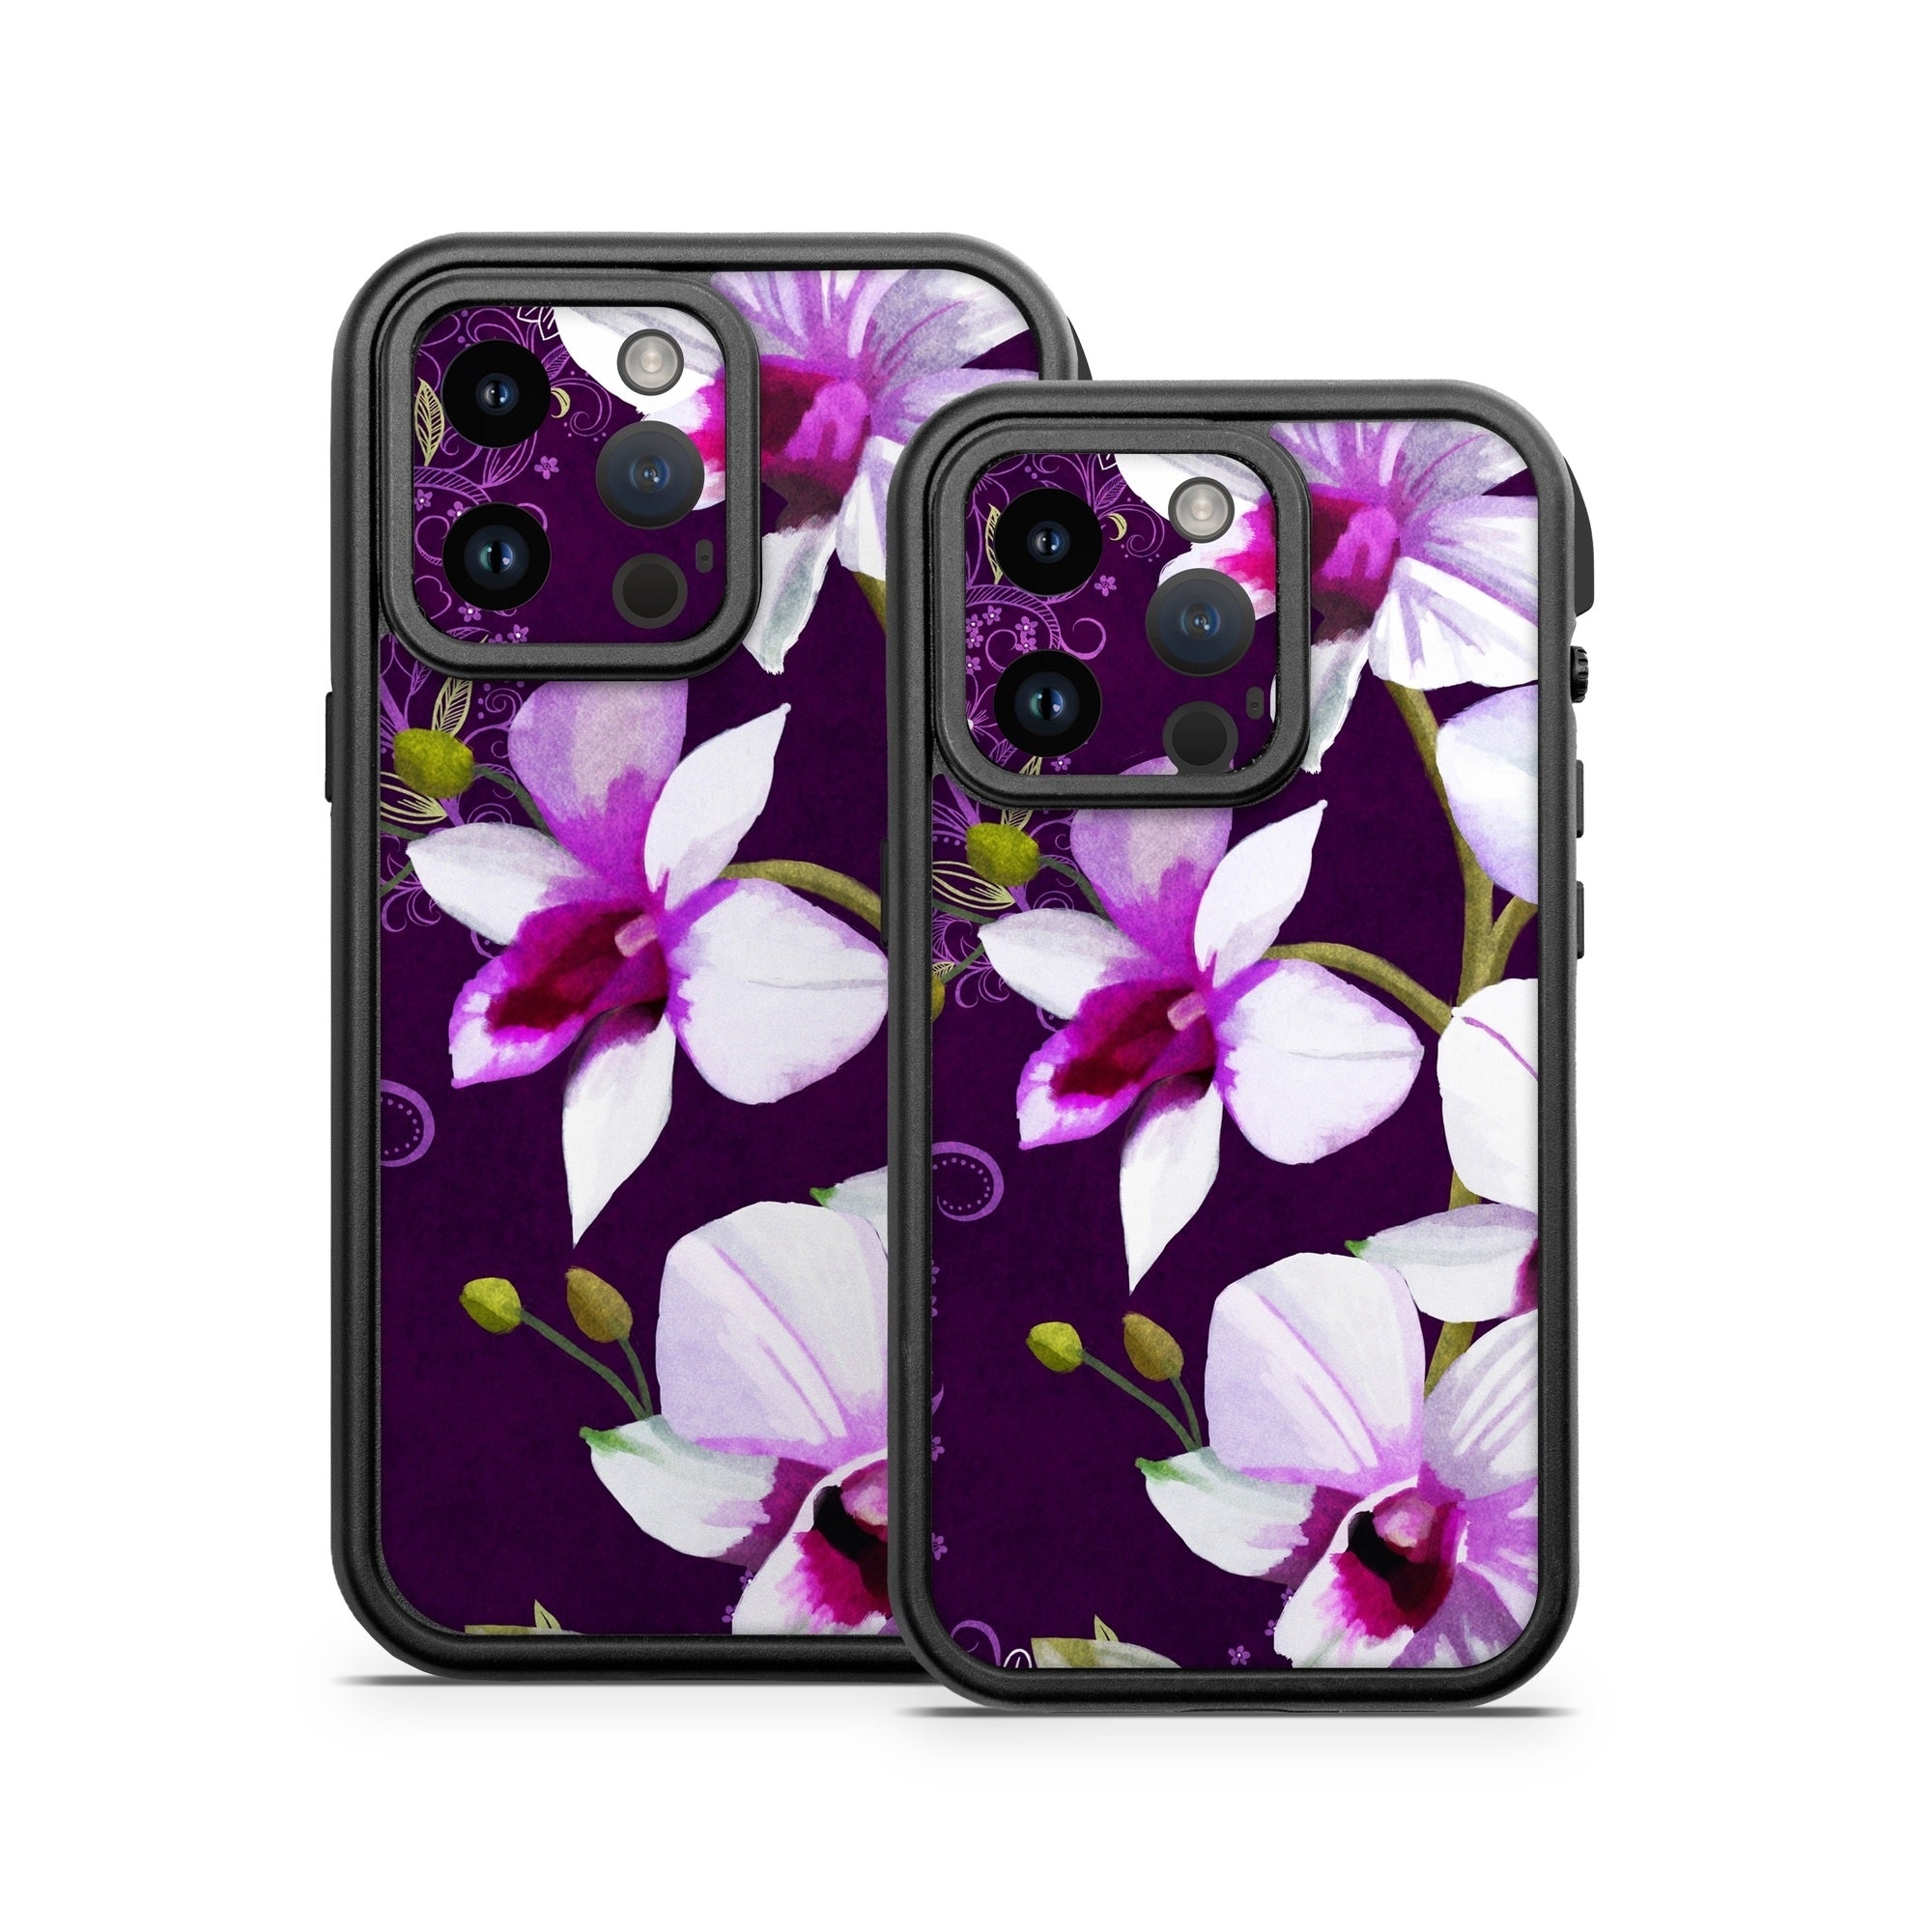 Violet Worlds - Otterbox Fre iPhone 14 Case Skin